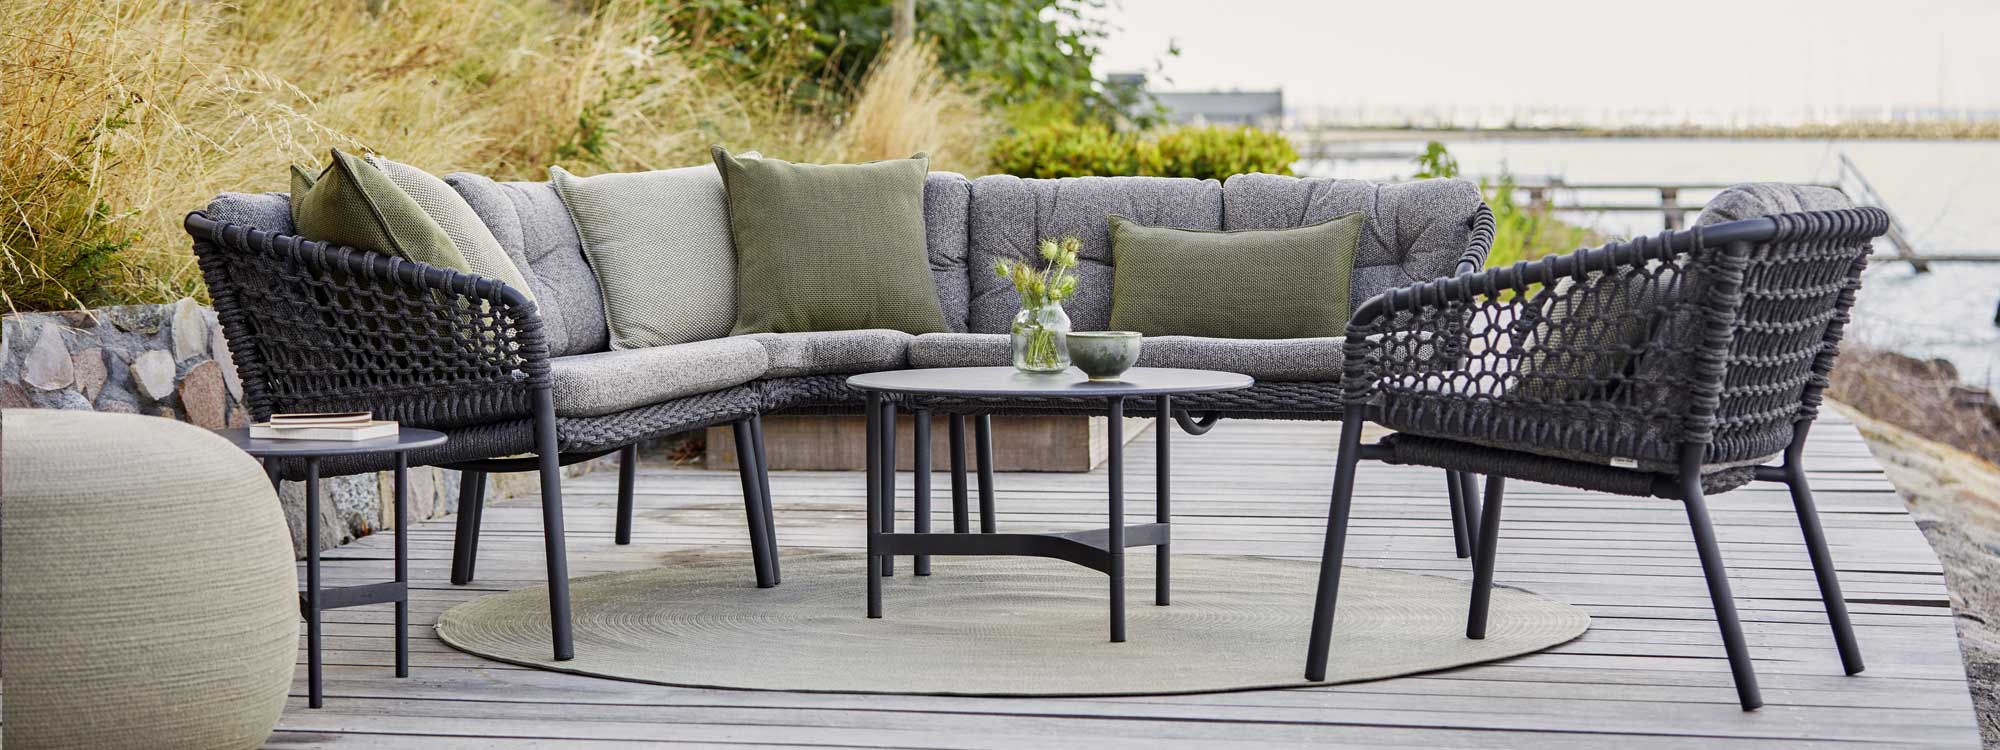 Image of grey Ocean sofa and grey Twist coffee table by Caneline, shown on decking beside grasses and the sea